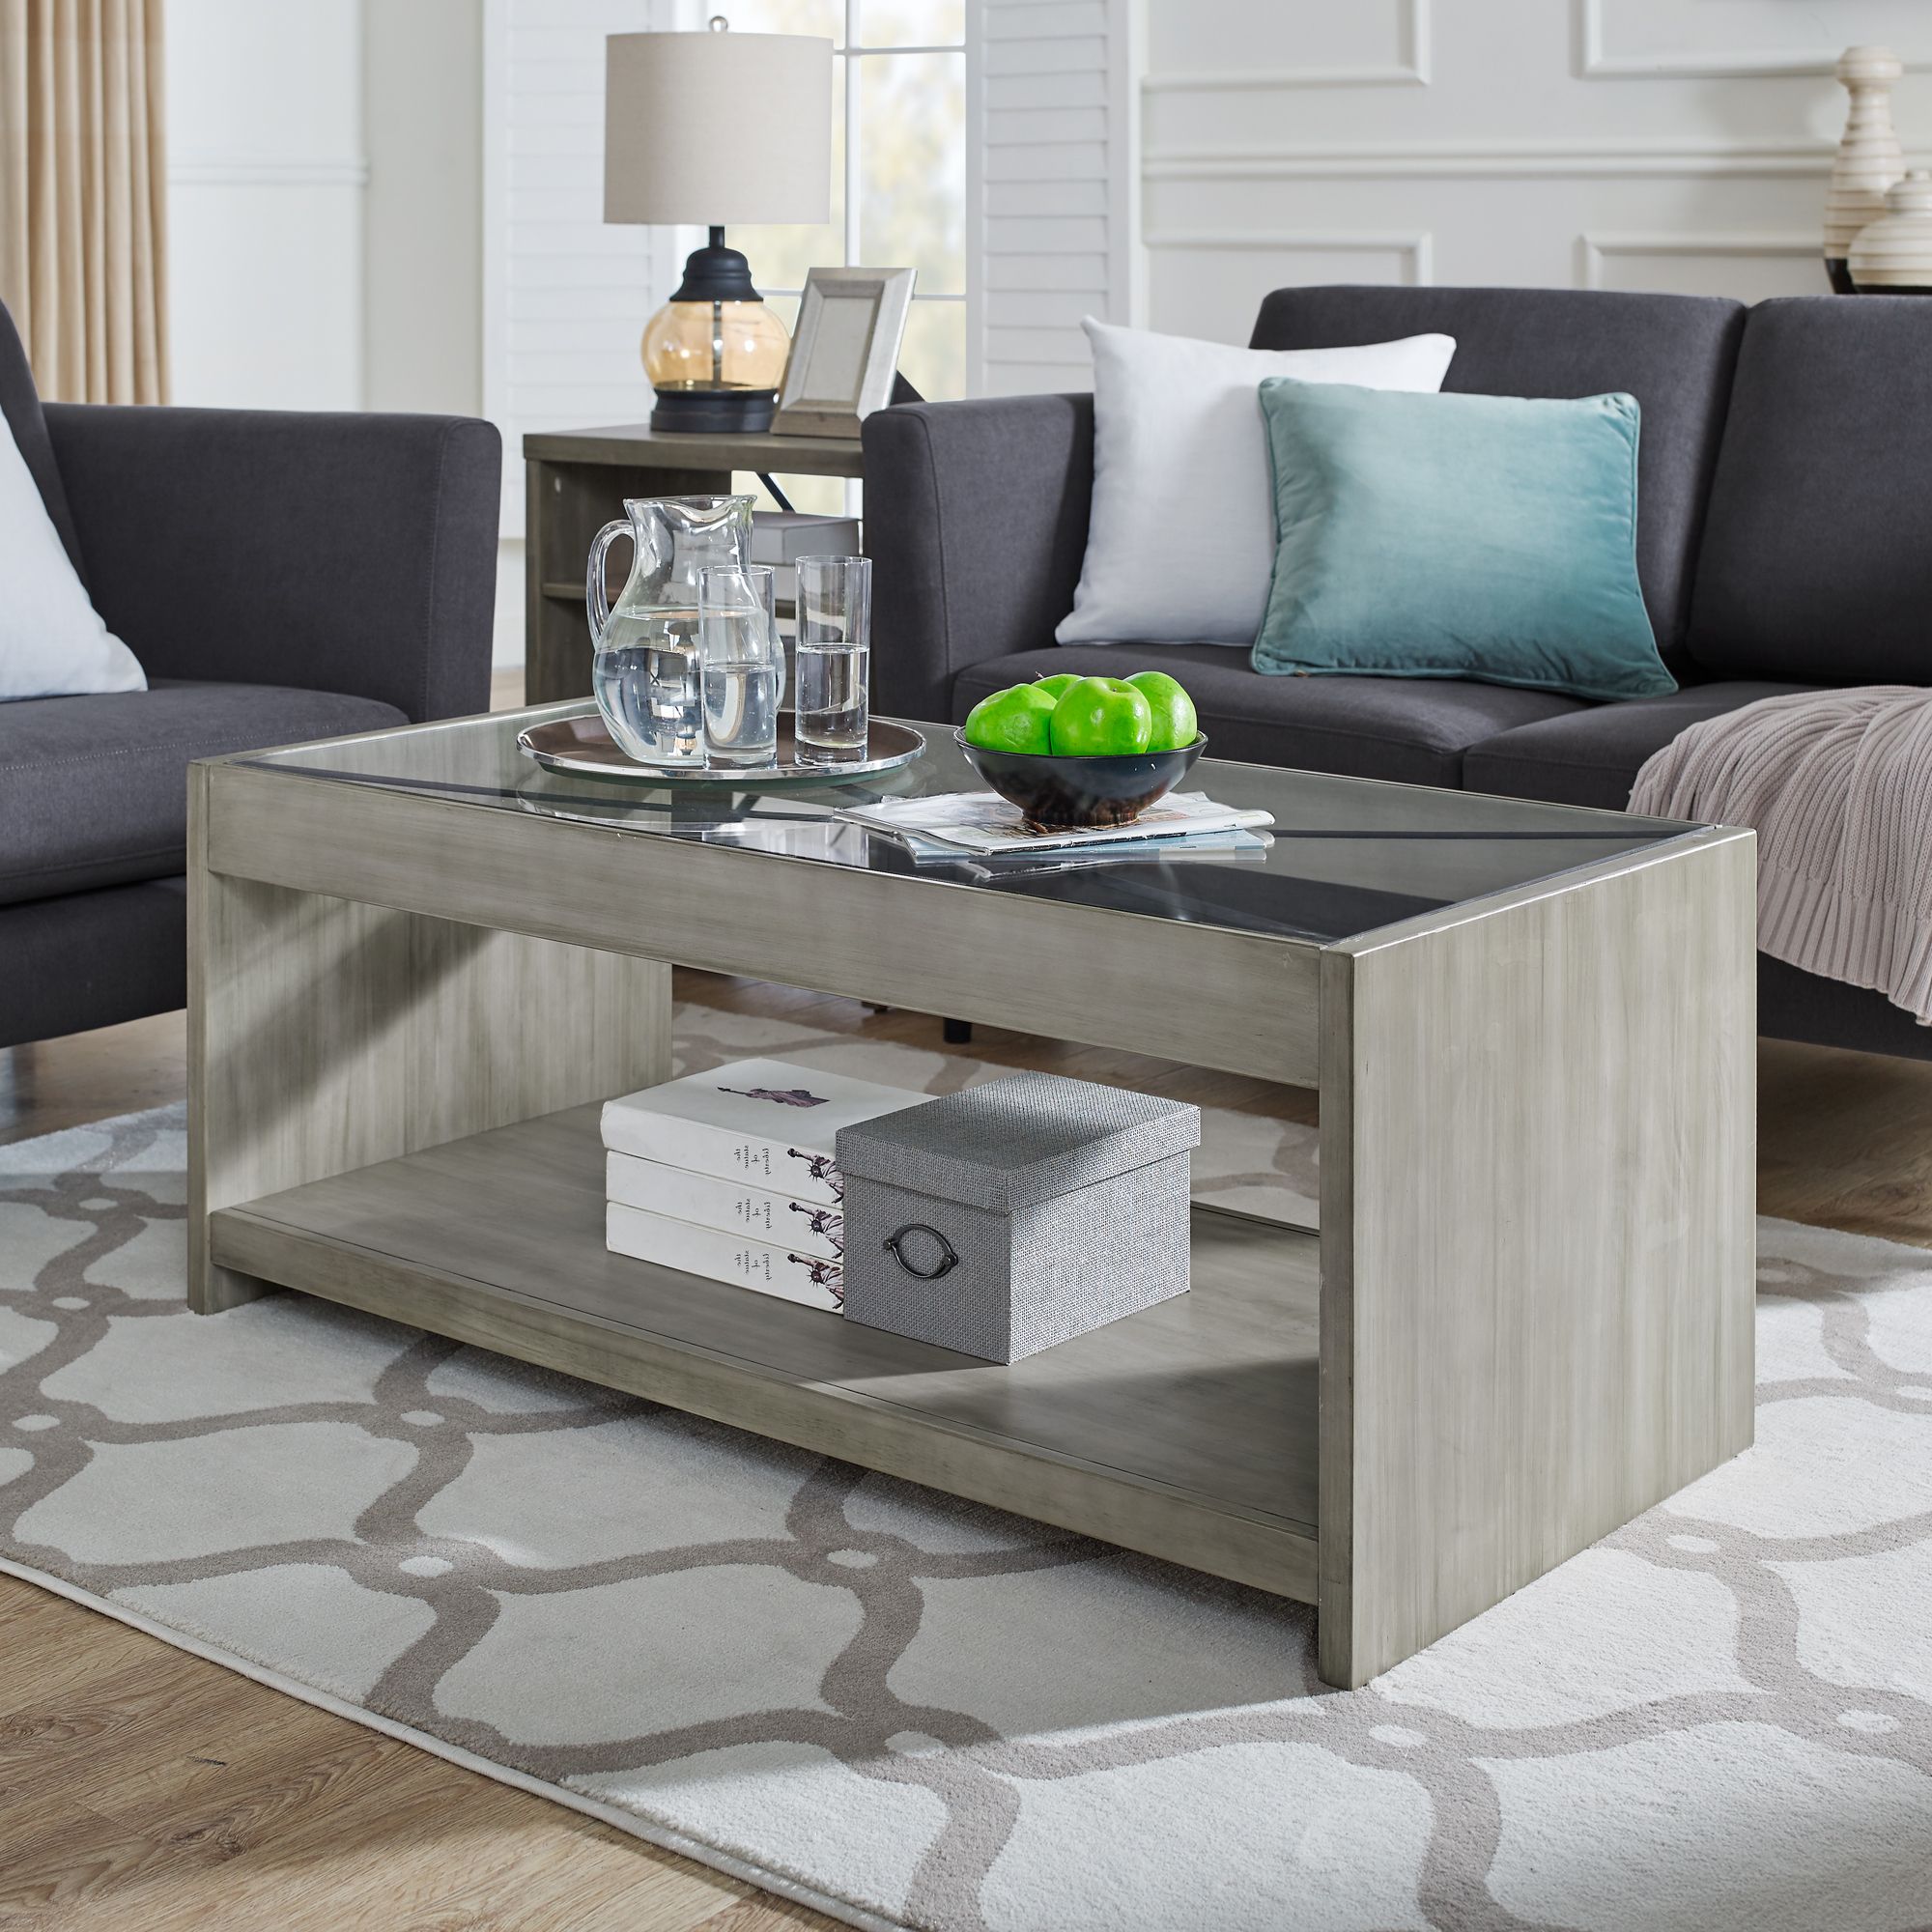 Modern Essentials Georgette Rustic Farm House Solid Wood Within Popular Geometric Glass Modern Coffee Tables (View 7 of 20)